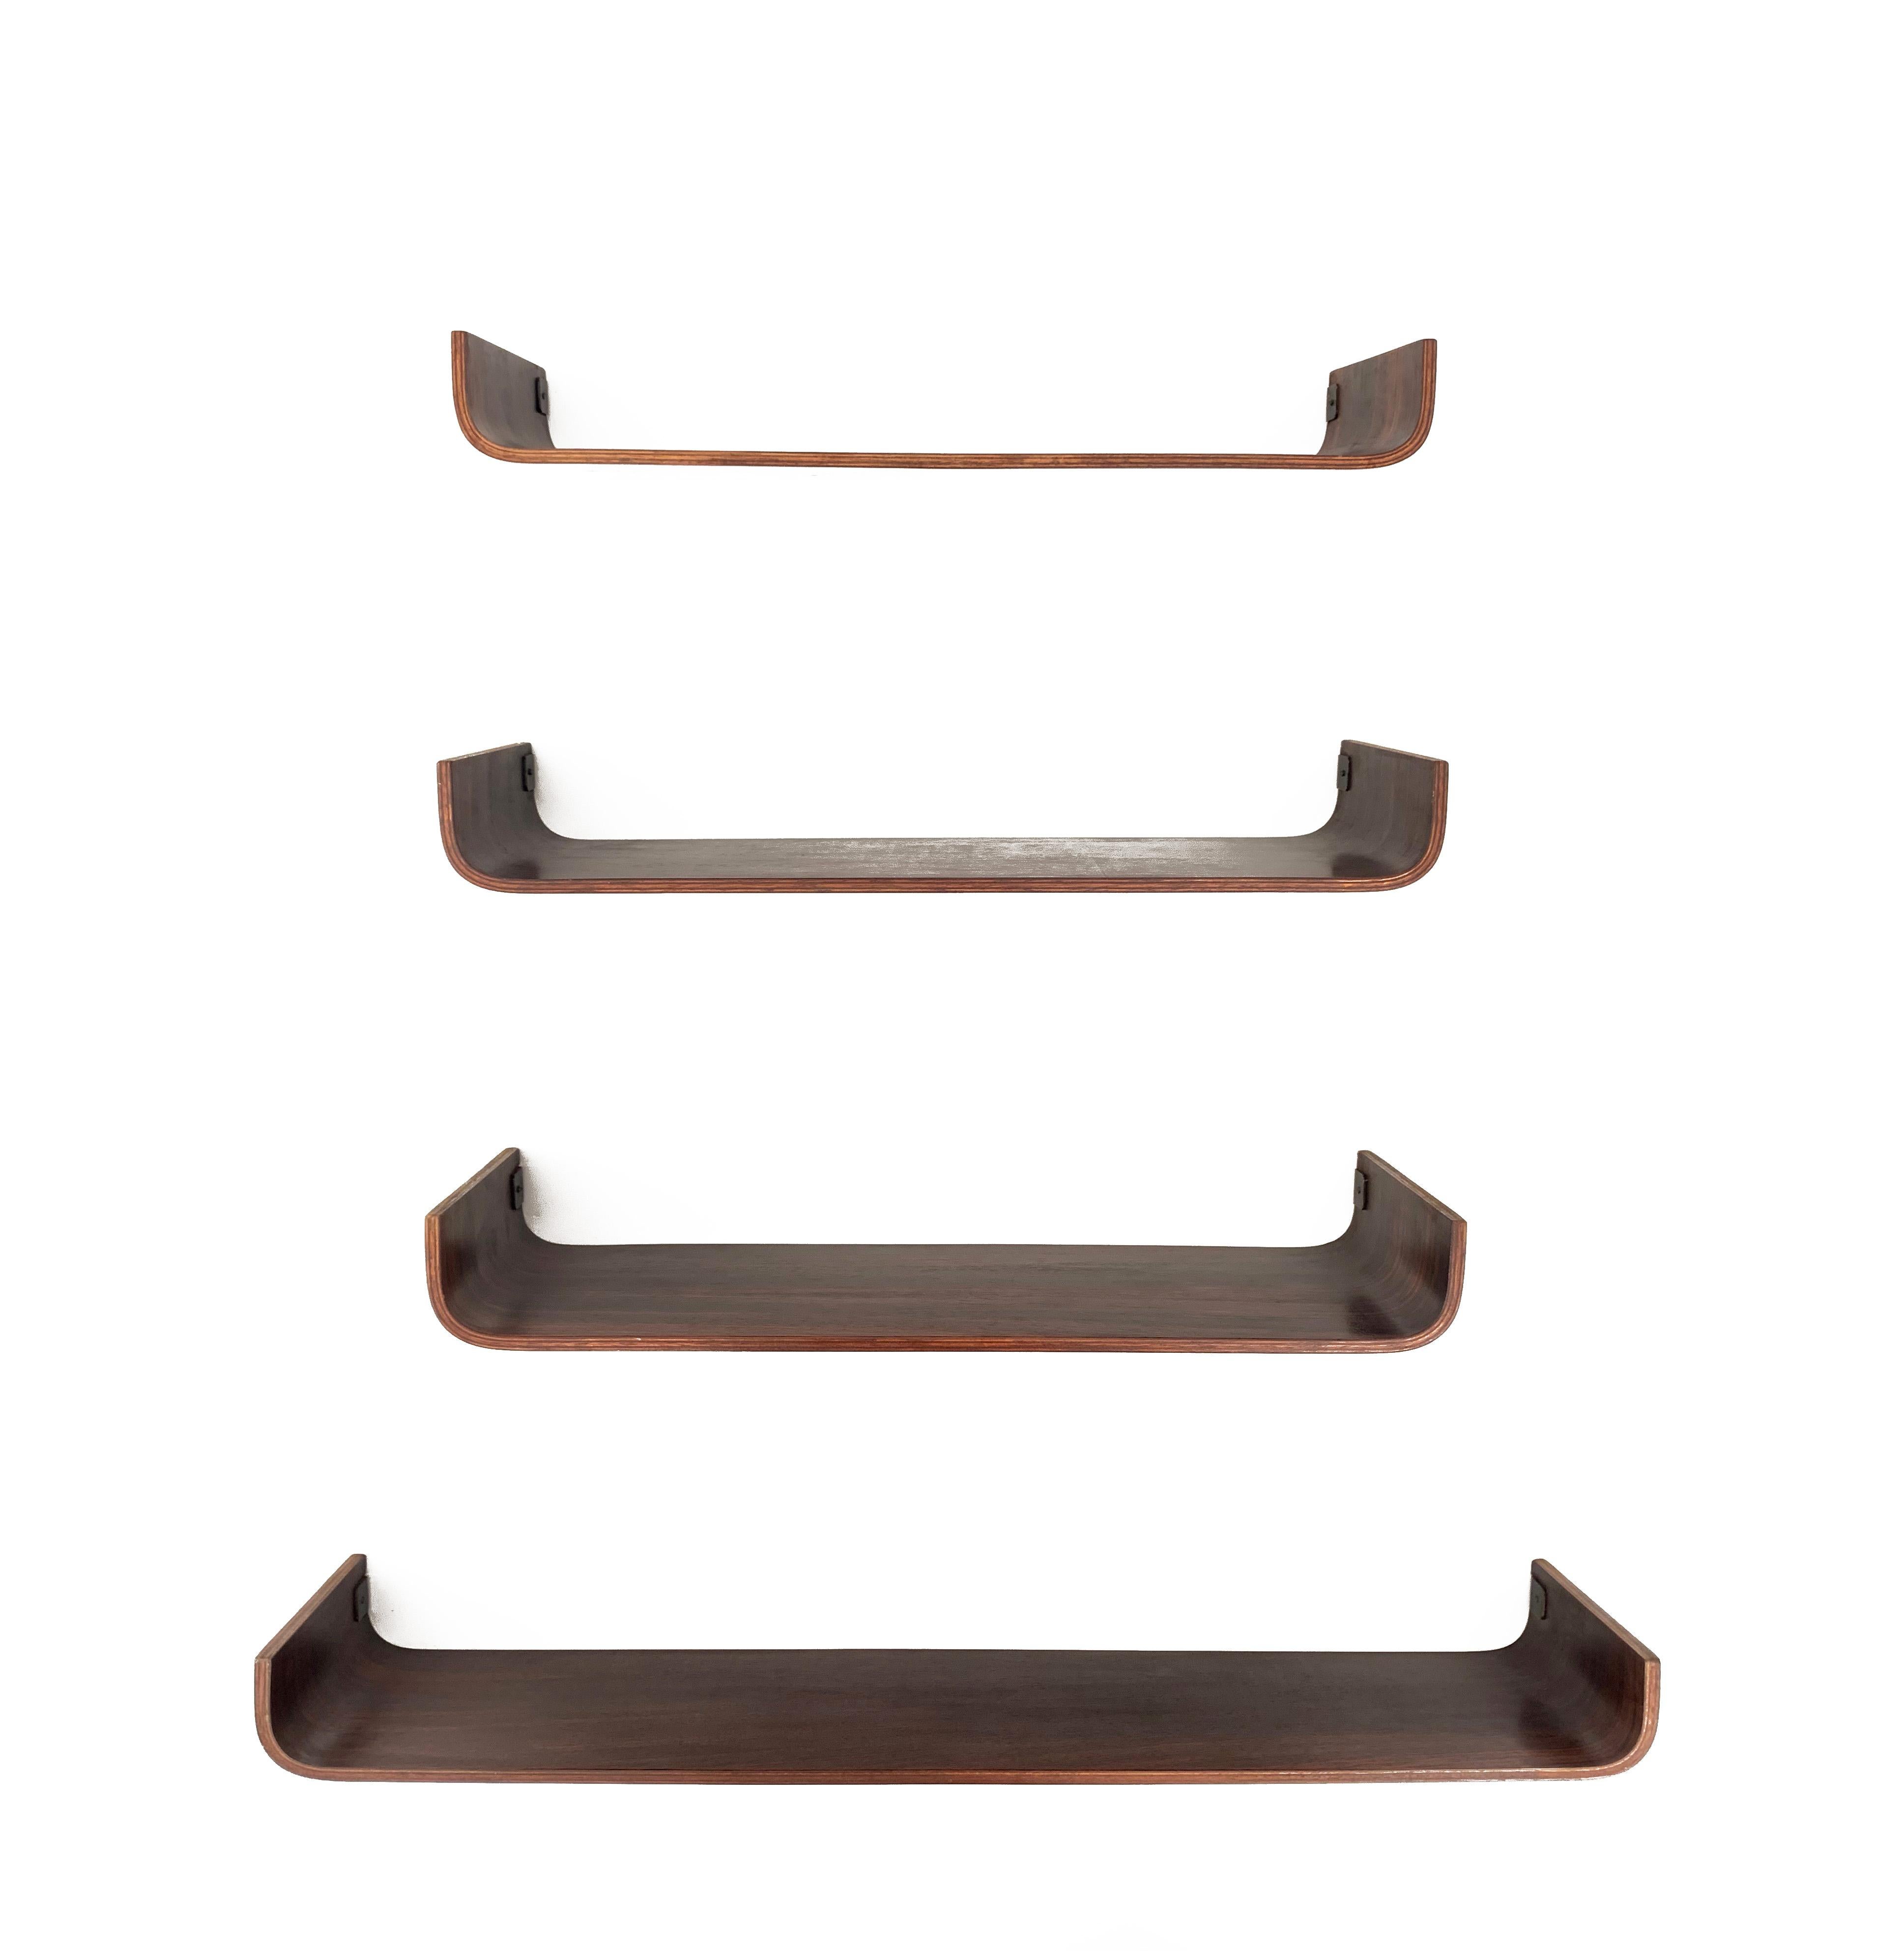 Wonderful set of 4 rosewood shelves, produced by Creazioni Stilcasa in Italy during 1965. The pieces are all labelled 